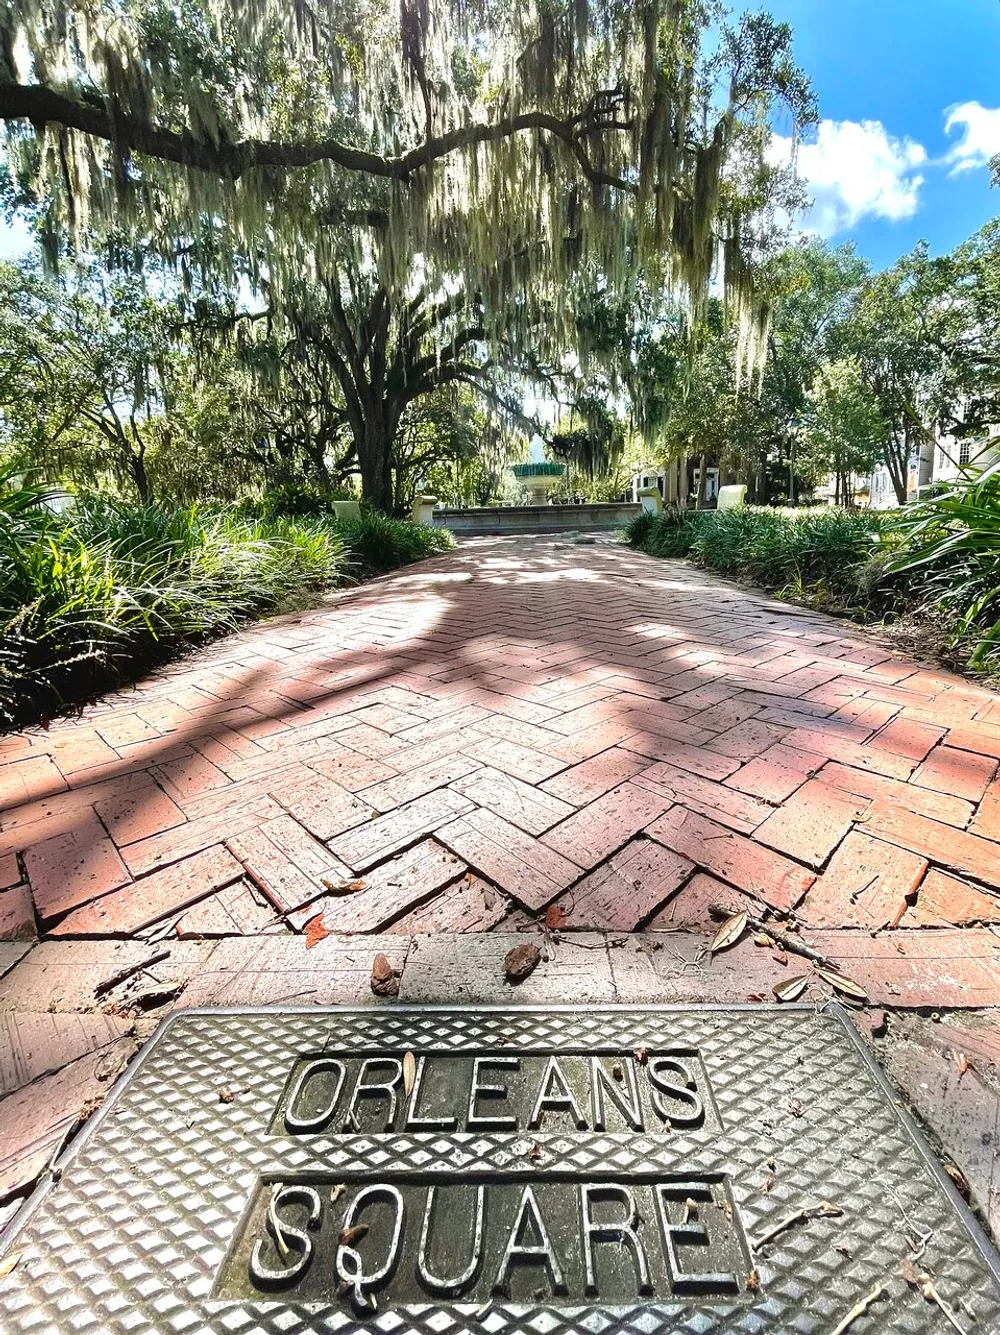 The image shows a sunny pathway lined with brick pavers leading through a park with dangling Spanish moss from large oak trees with a metal plate in the foreground that reads Orleans Square